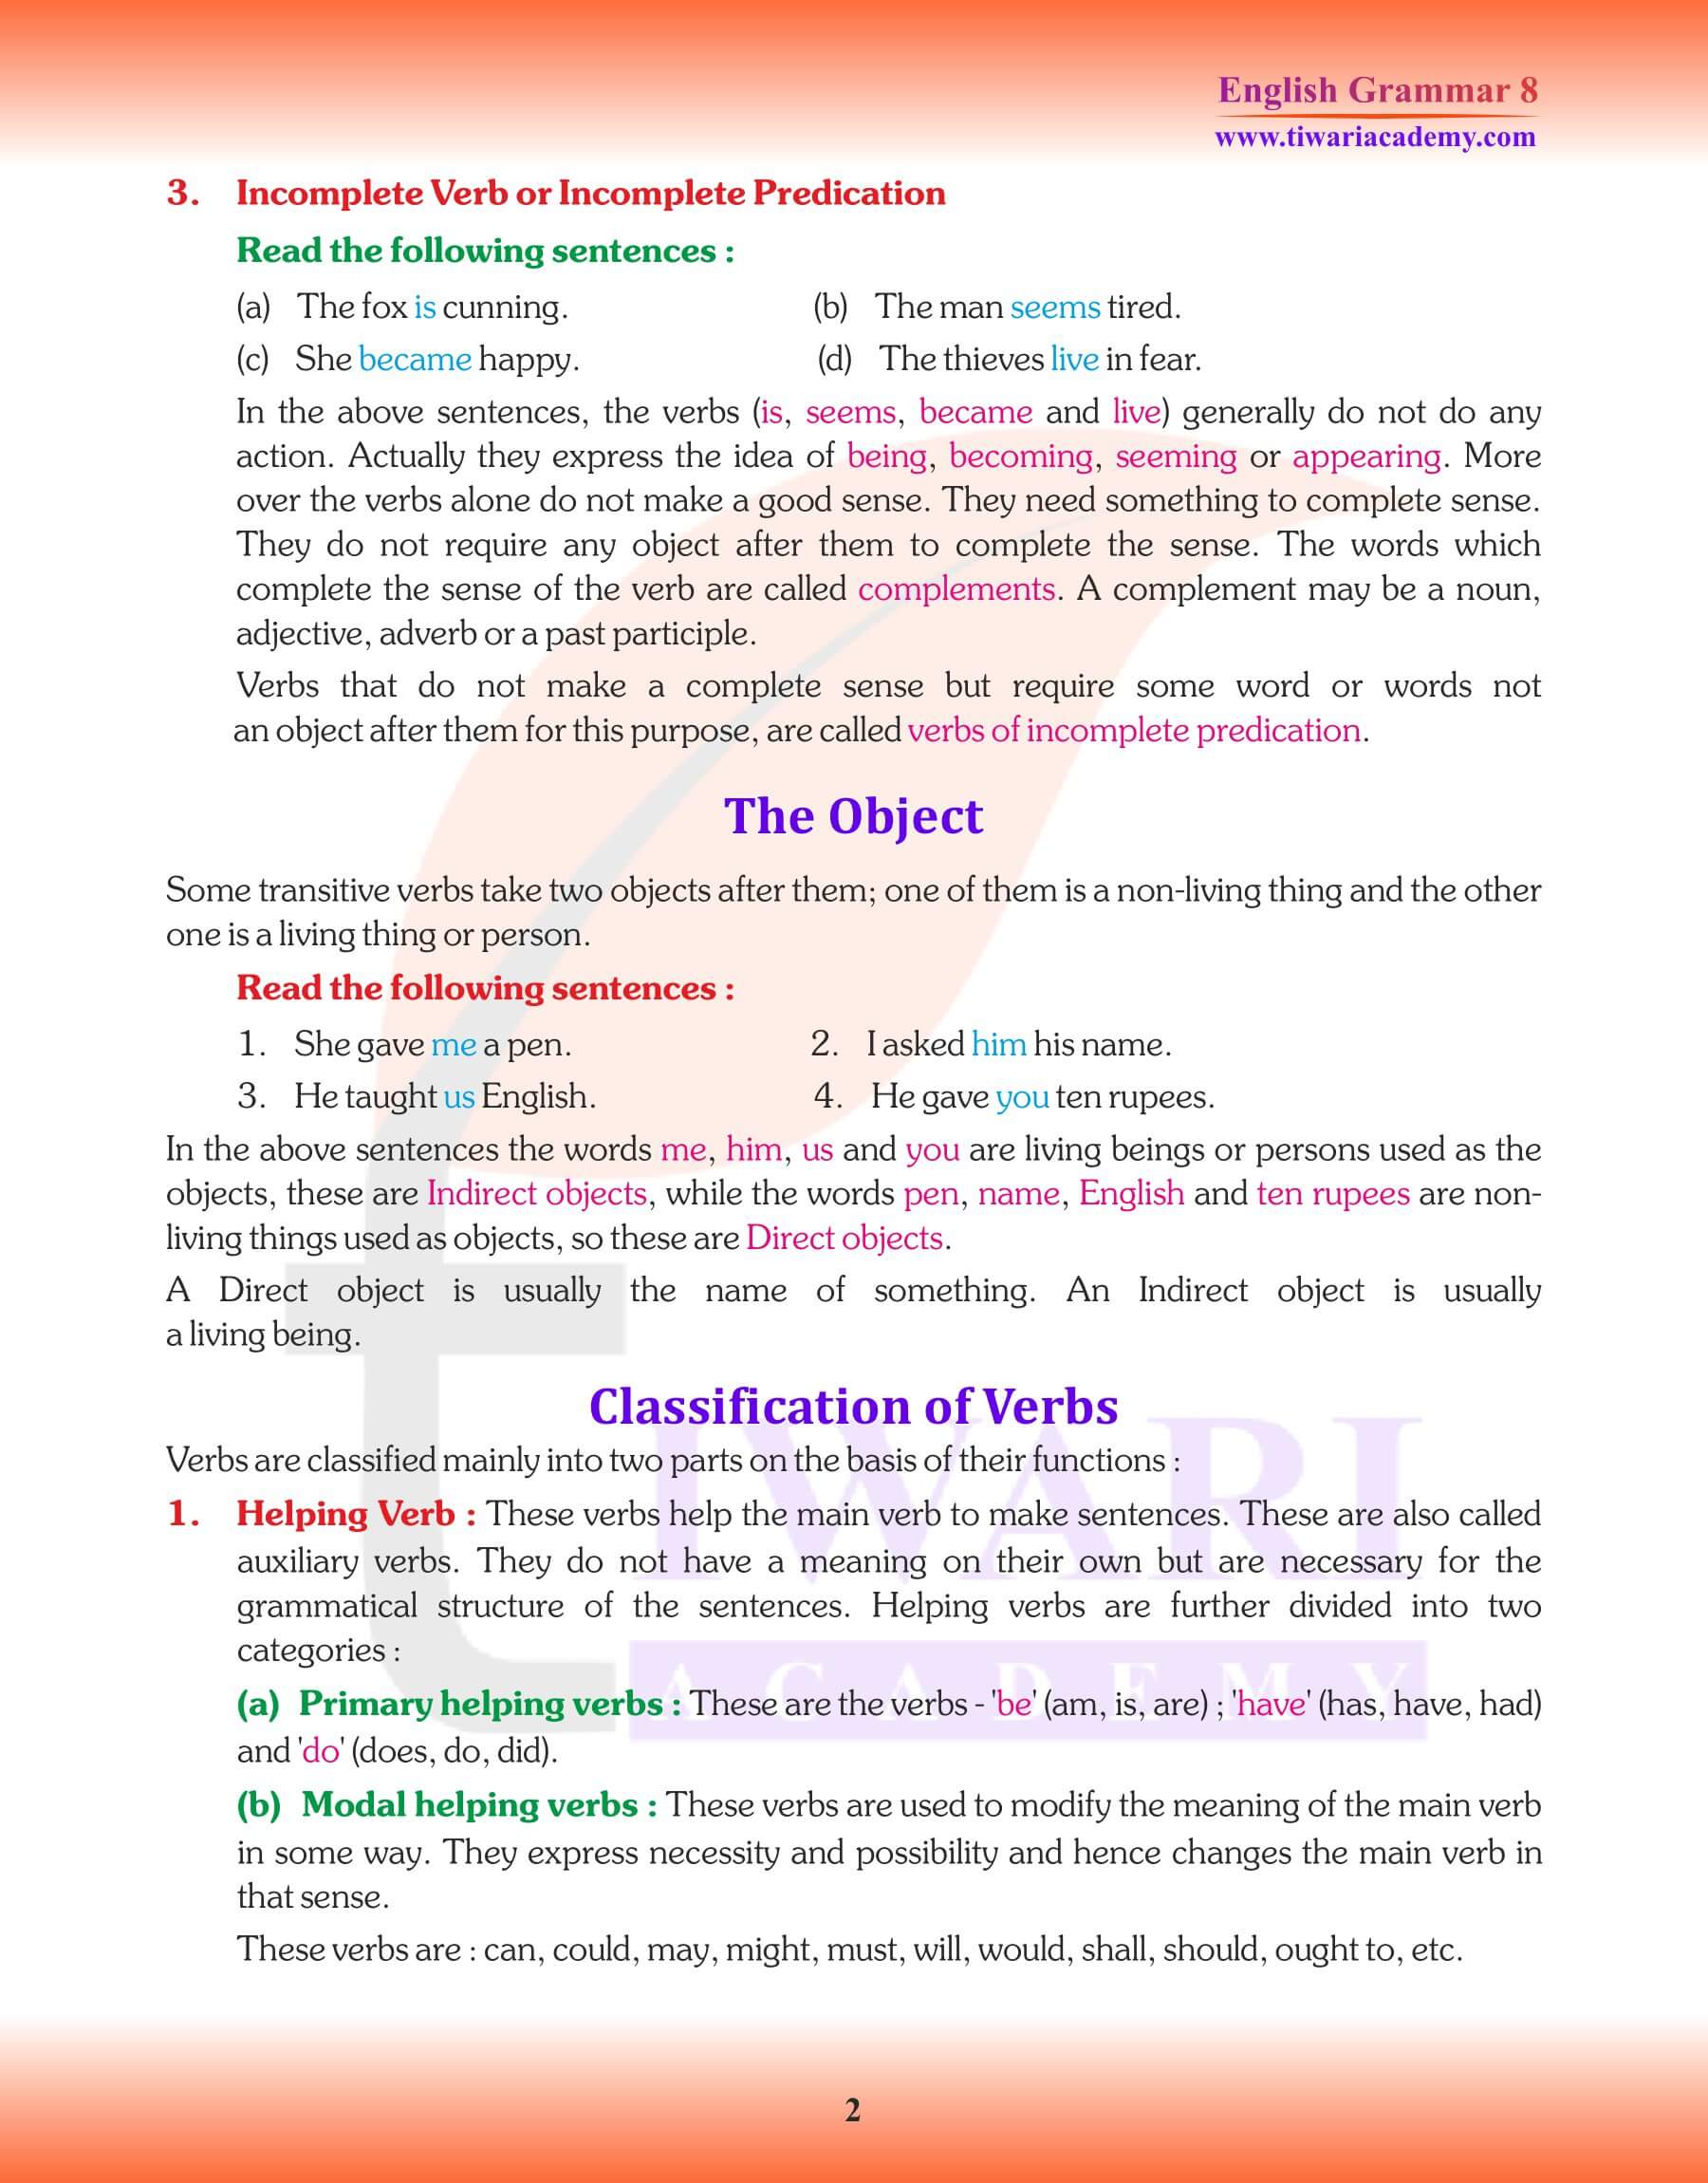 Class 8 English Grammar Chapter 6 The Verb Revision book